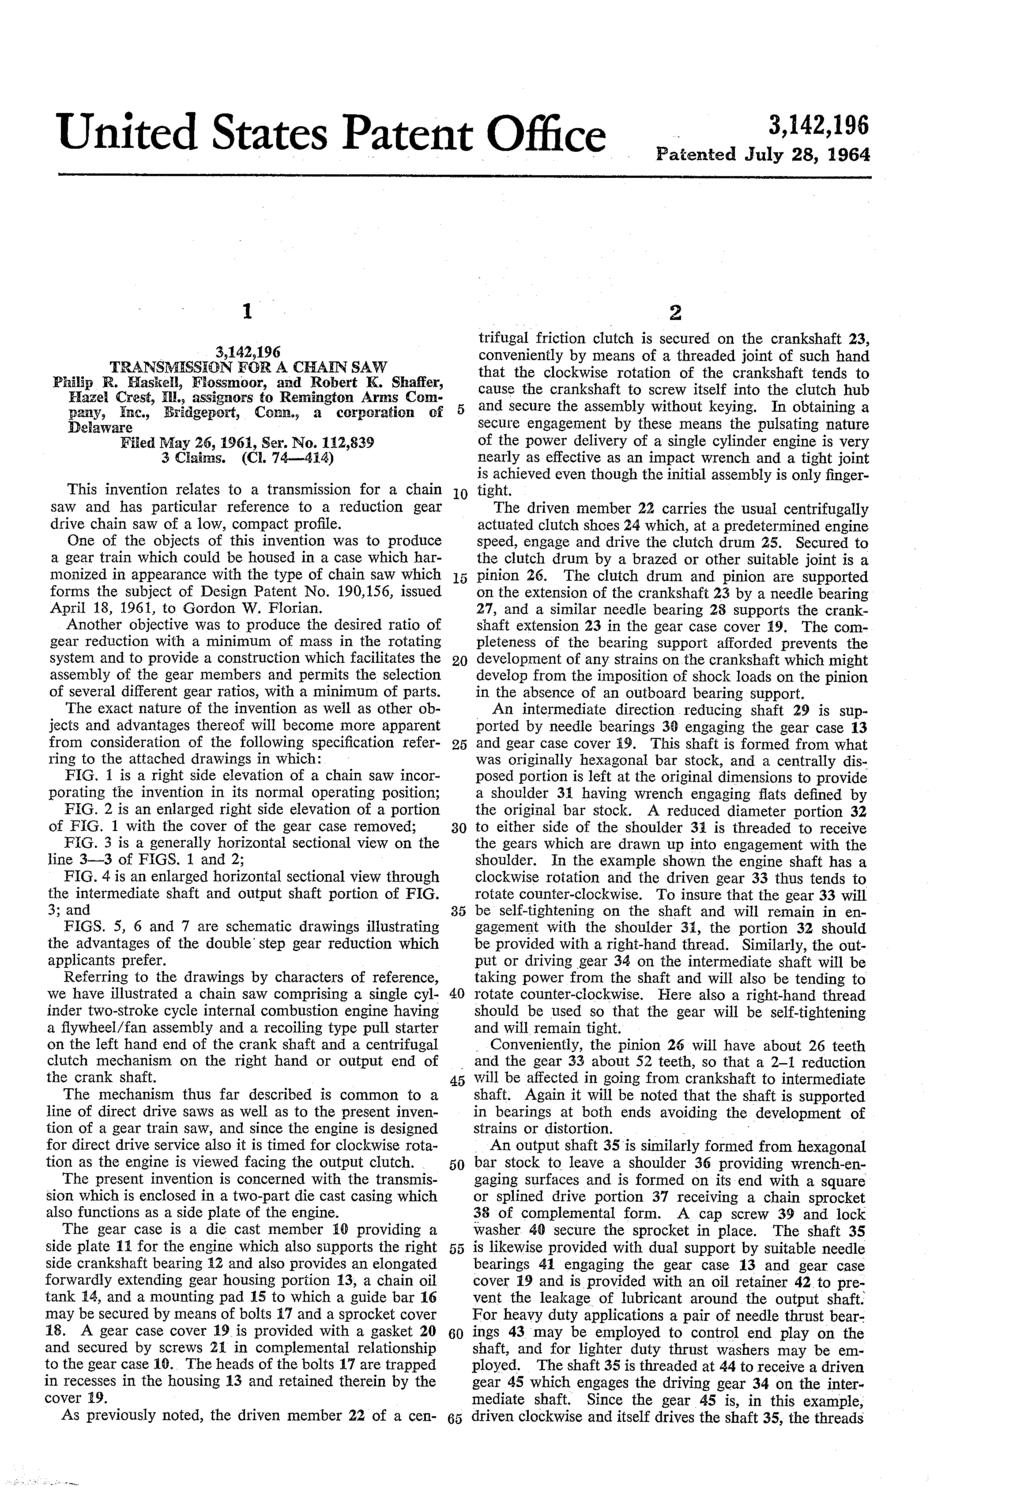 United States Patent Office Patiented July 28, 1964 1. TRANSMESSEON FOR A CHAIN SAW Philip R. Haskell, Fossmoor, and Robert K. Shaffer, Hazel Crest, B., assignors to Remington Arms Com pany, Inc.